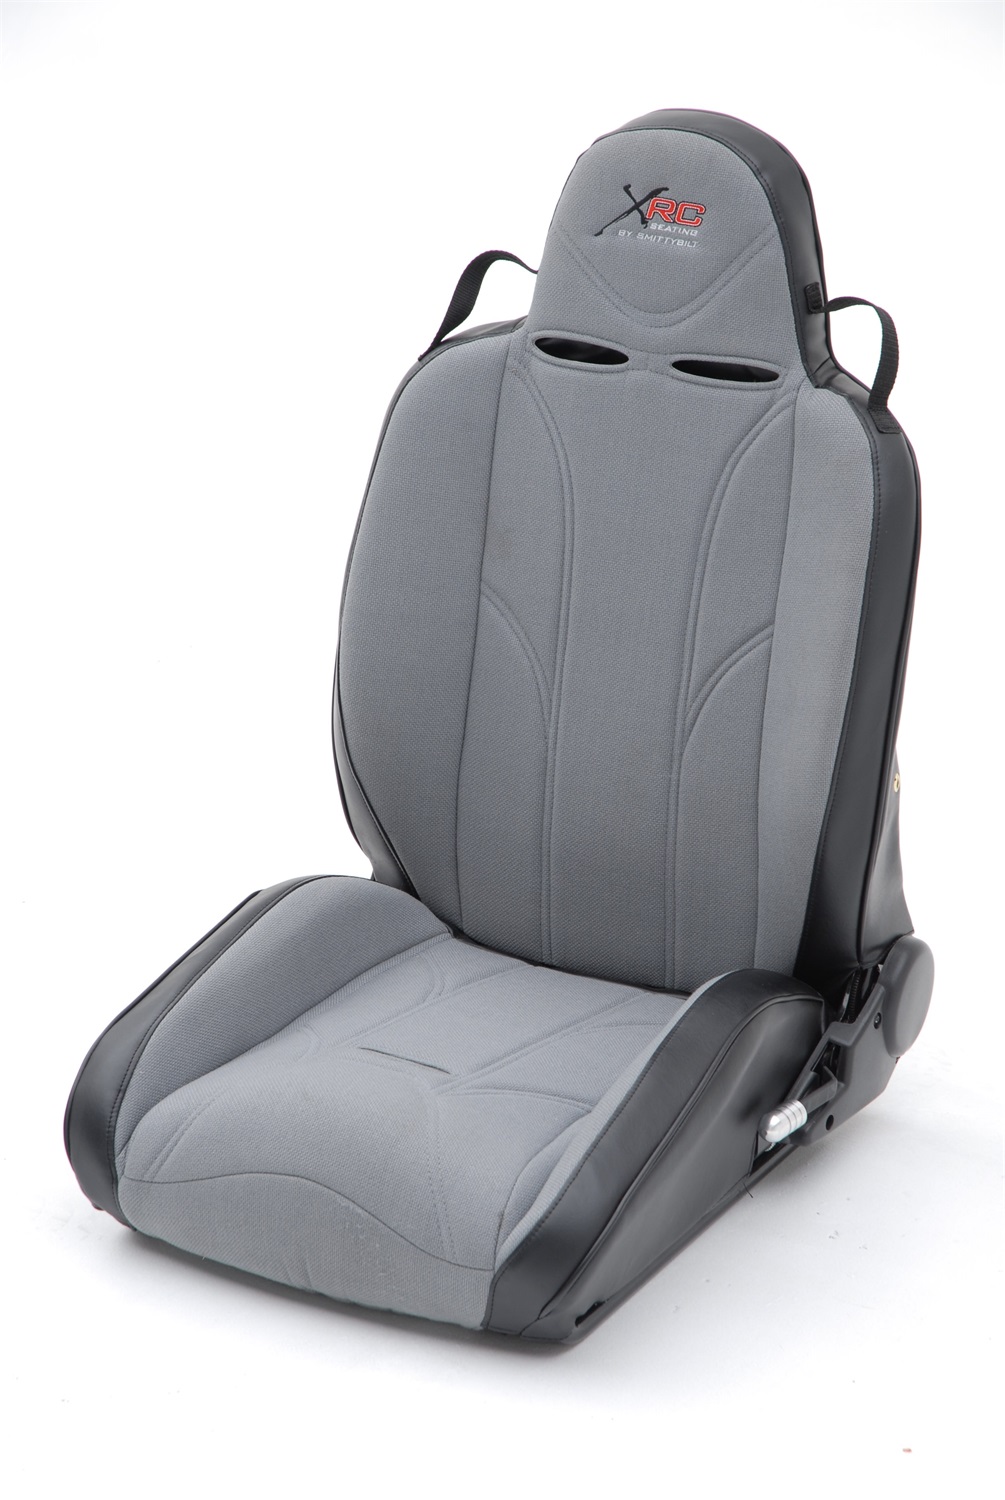 Show details for Smittybilt XRC Performance Seat Cover